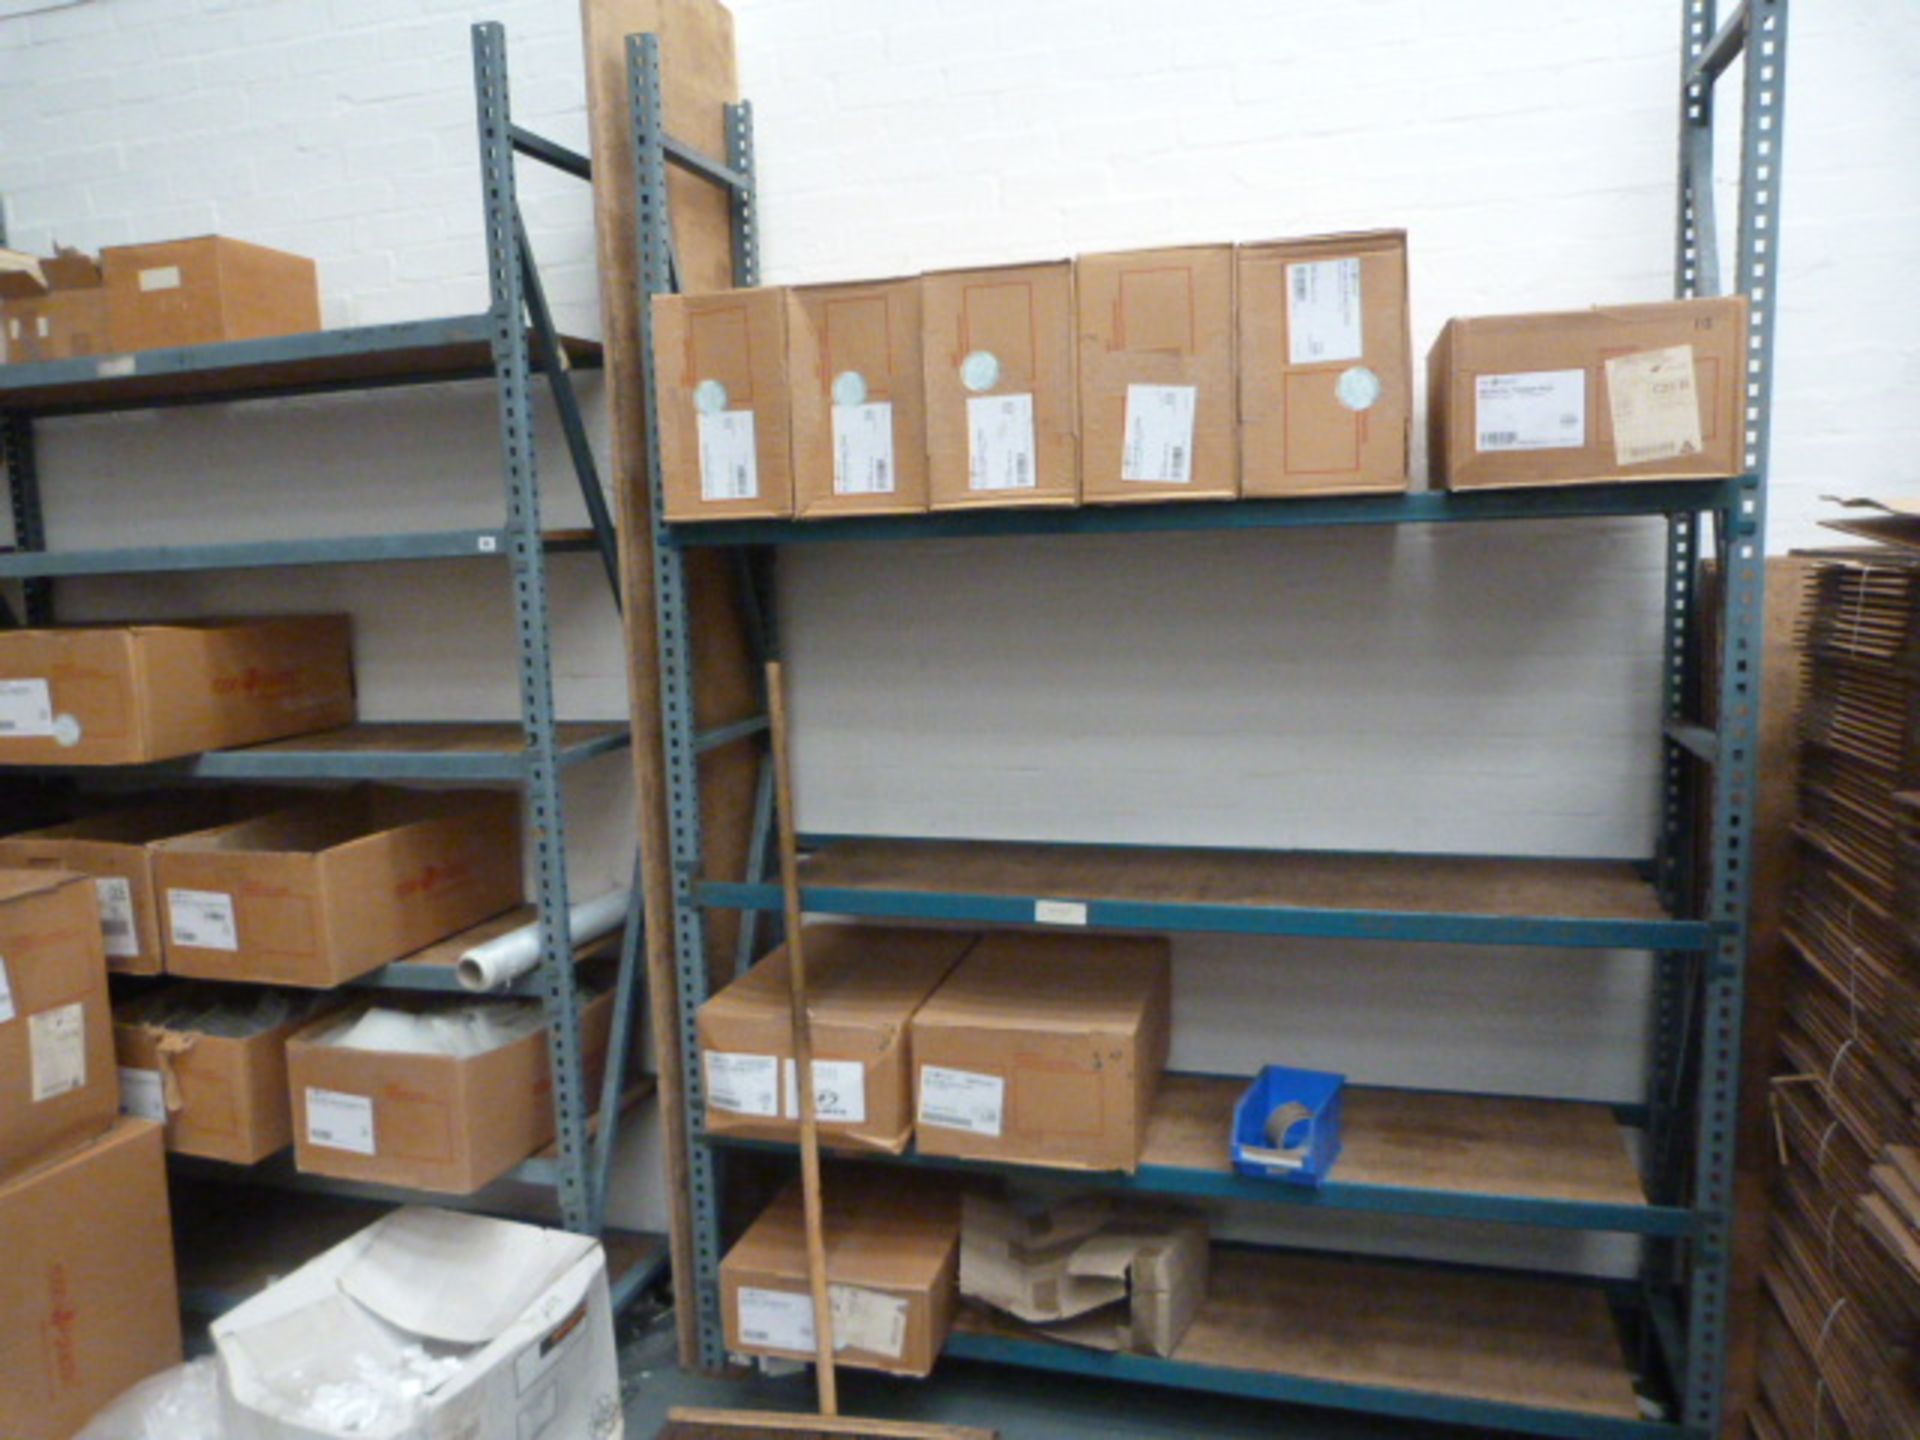 Five Bays of Medium Duty Boltless Shelving with Be